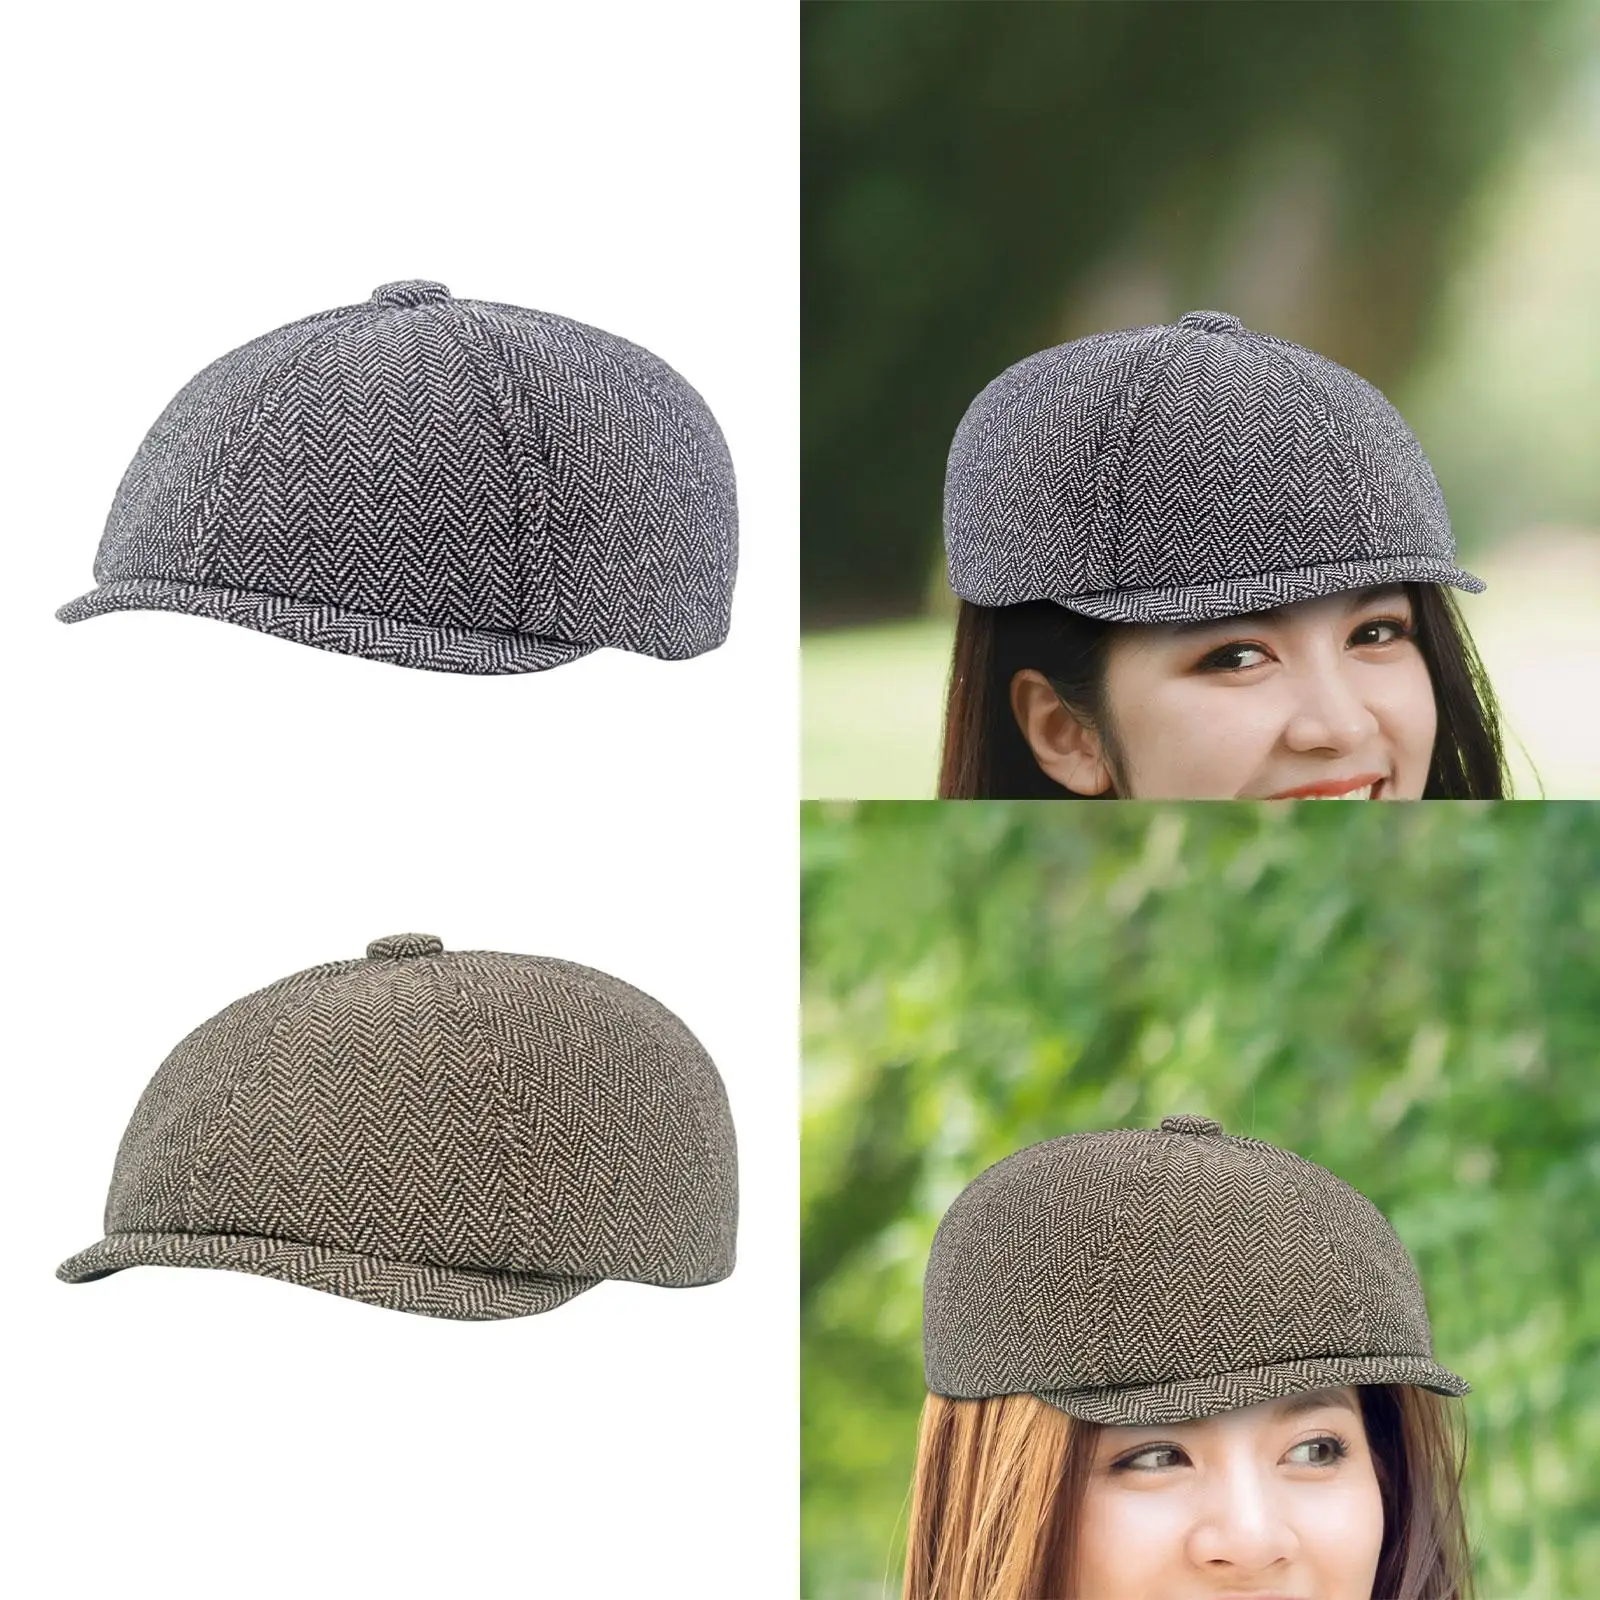 Beret Hat Golf Hat Fall Painter Hat Birthday Gift Casual Classic Cabbie Driving Hat for Traveling Hiking Fishing Driving Outdoor